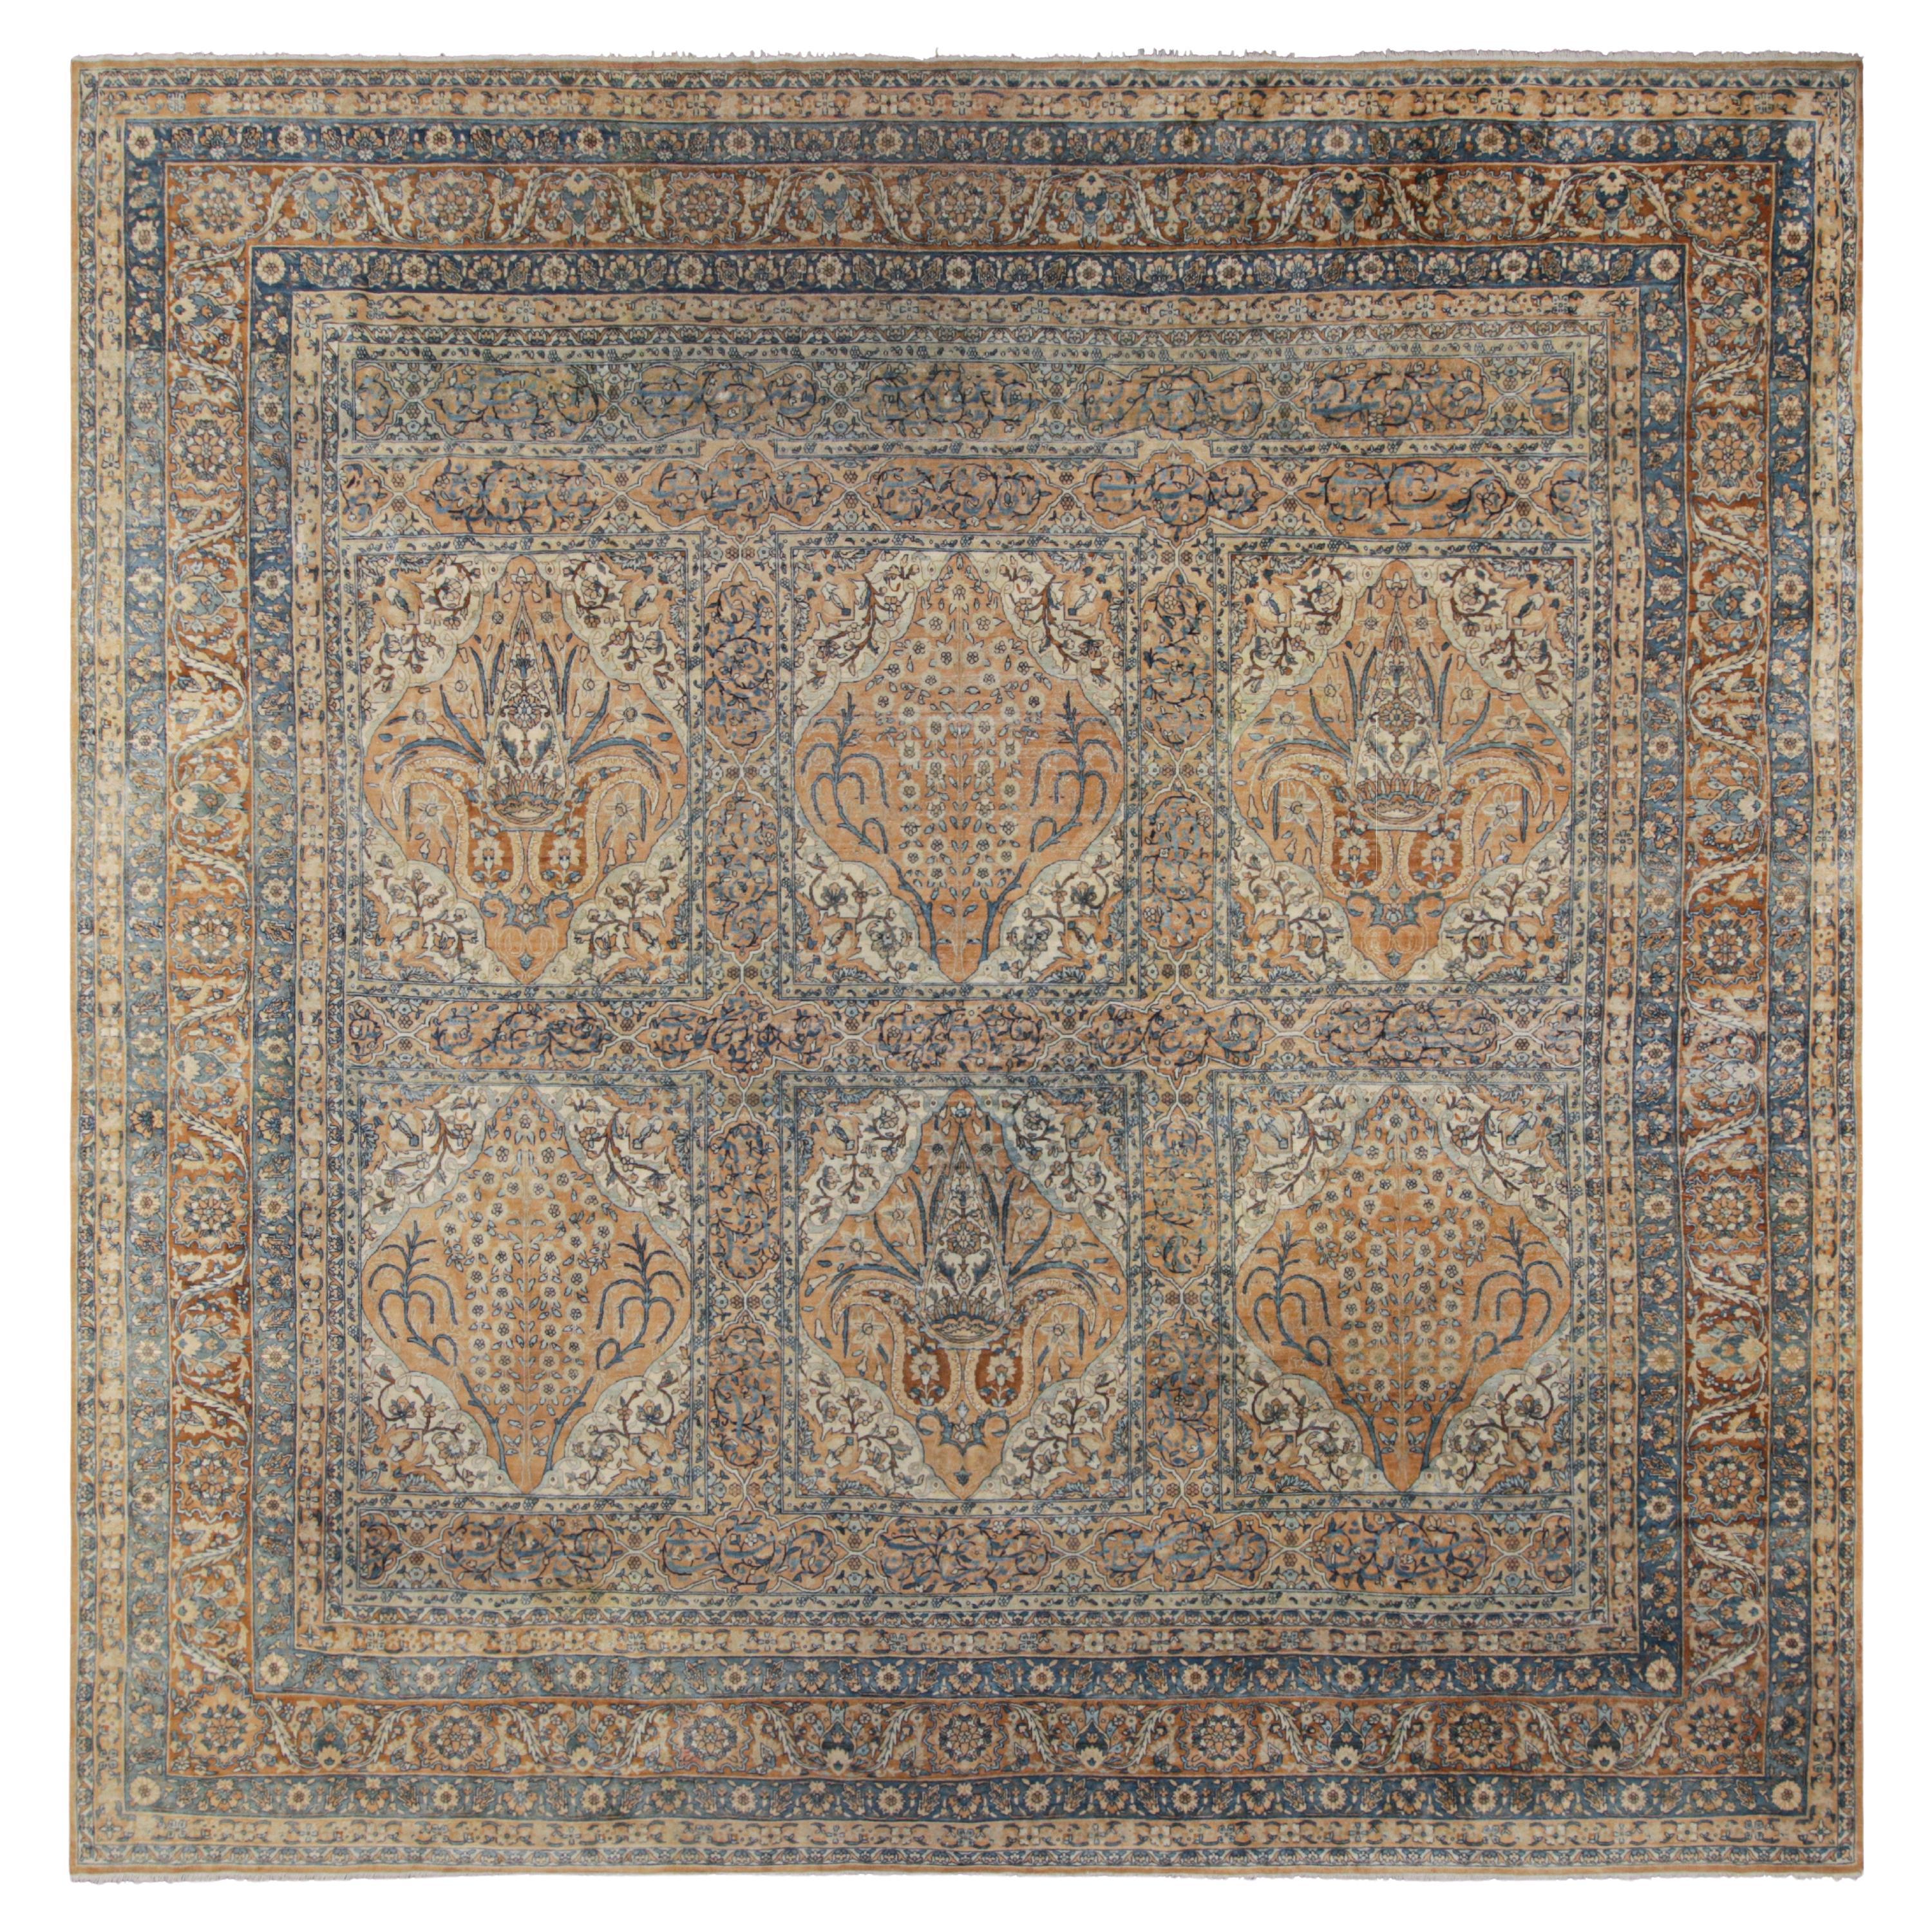 Antique Persian Kerman Rug with Gold and Blue Floral Patterns, from Rug & Kilim For Sale